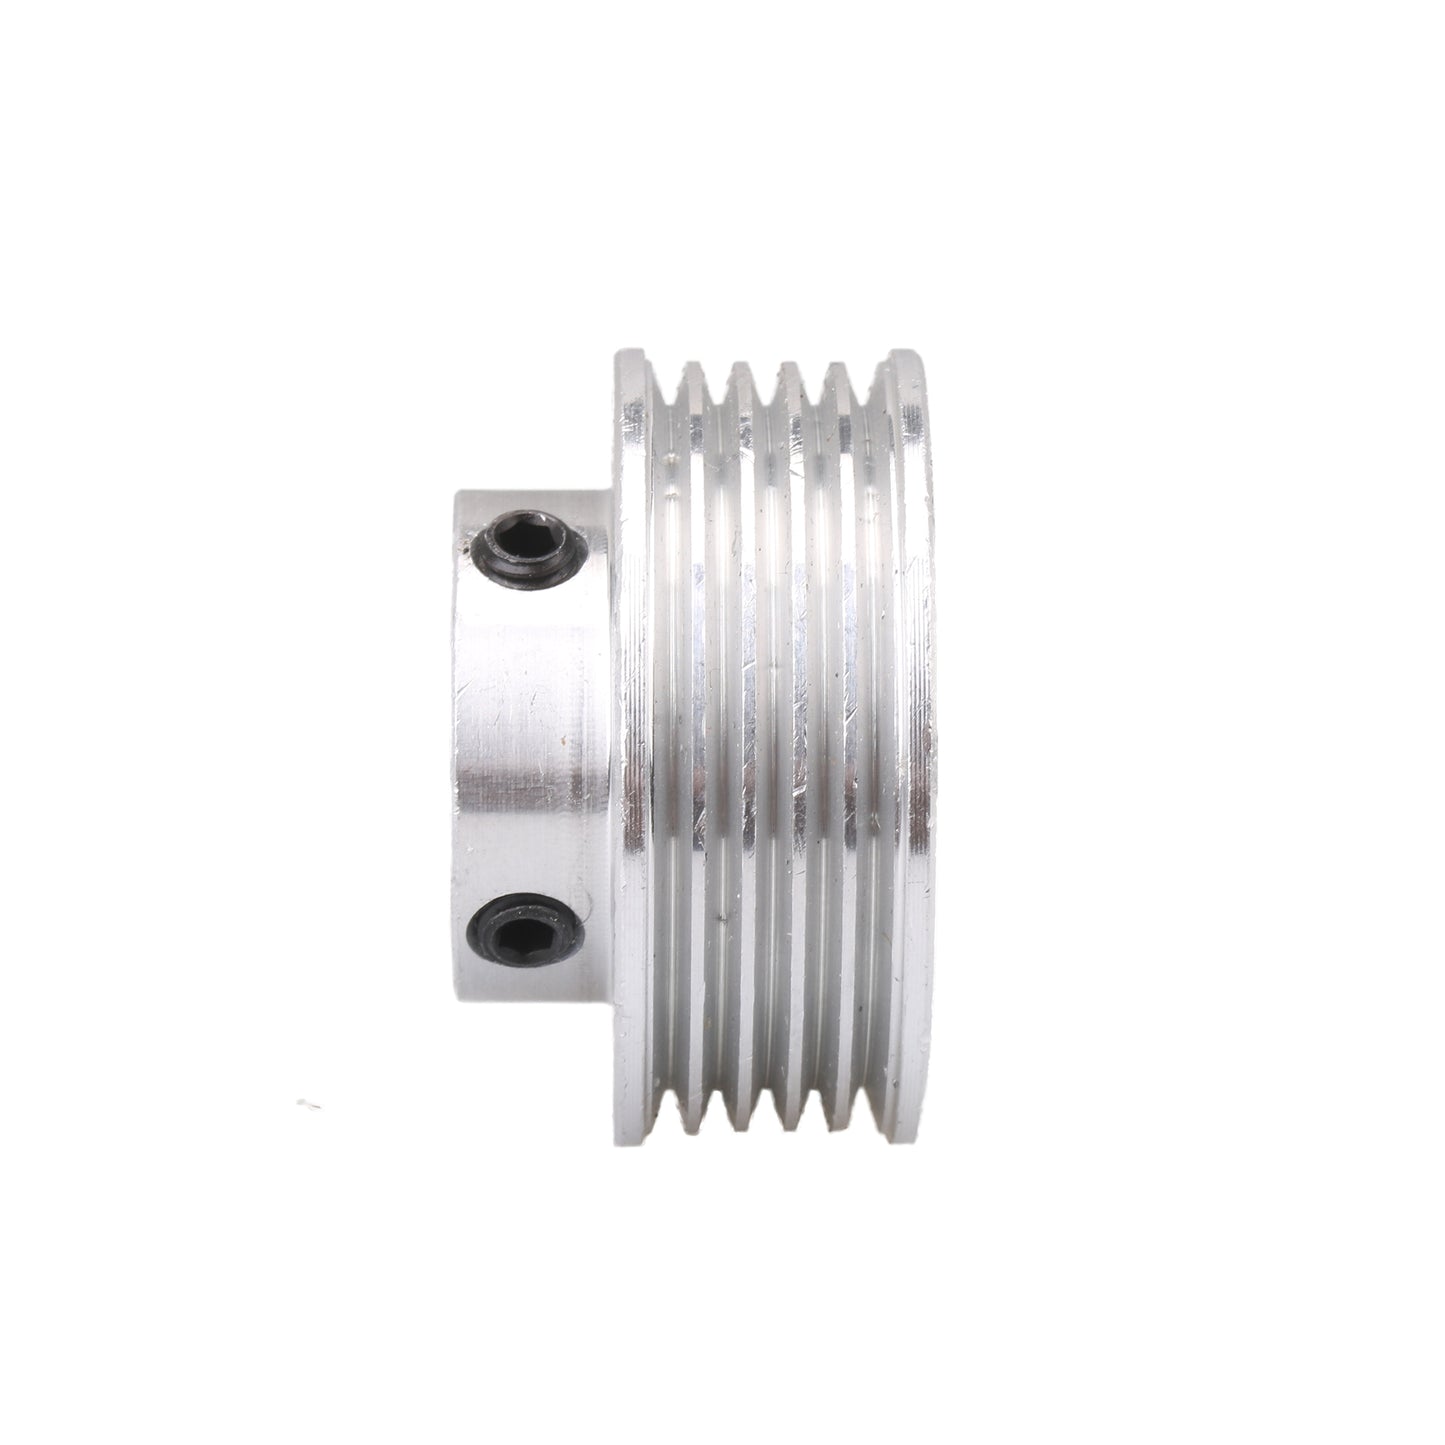 BQLZR 6 Teeth Outer Diameter 40mm Inner Hole 14mm PJ Belt Pulley for Motor Shaft Mini Table Electric Saw Sawing Machines